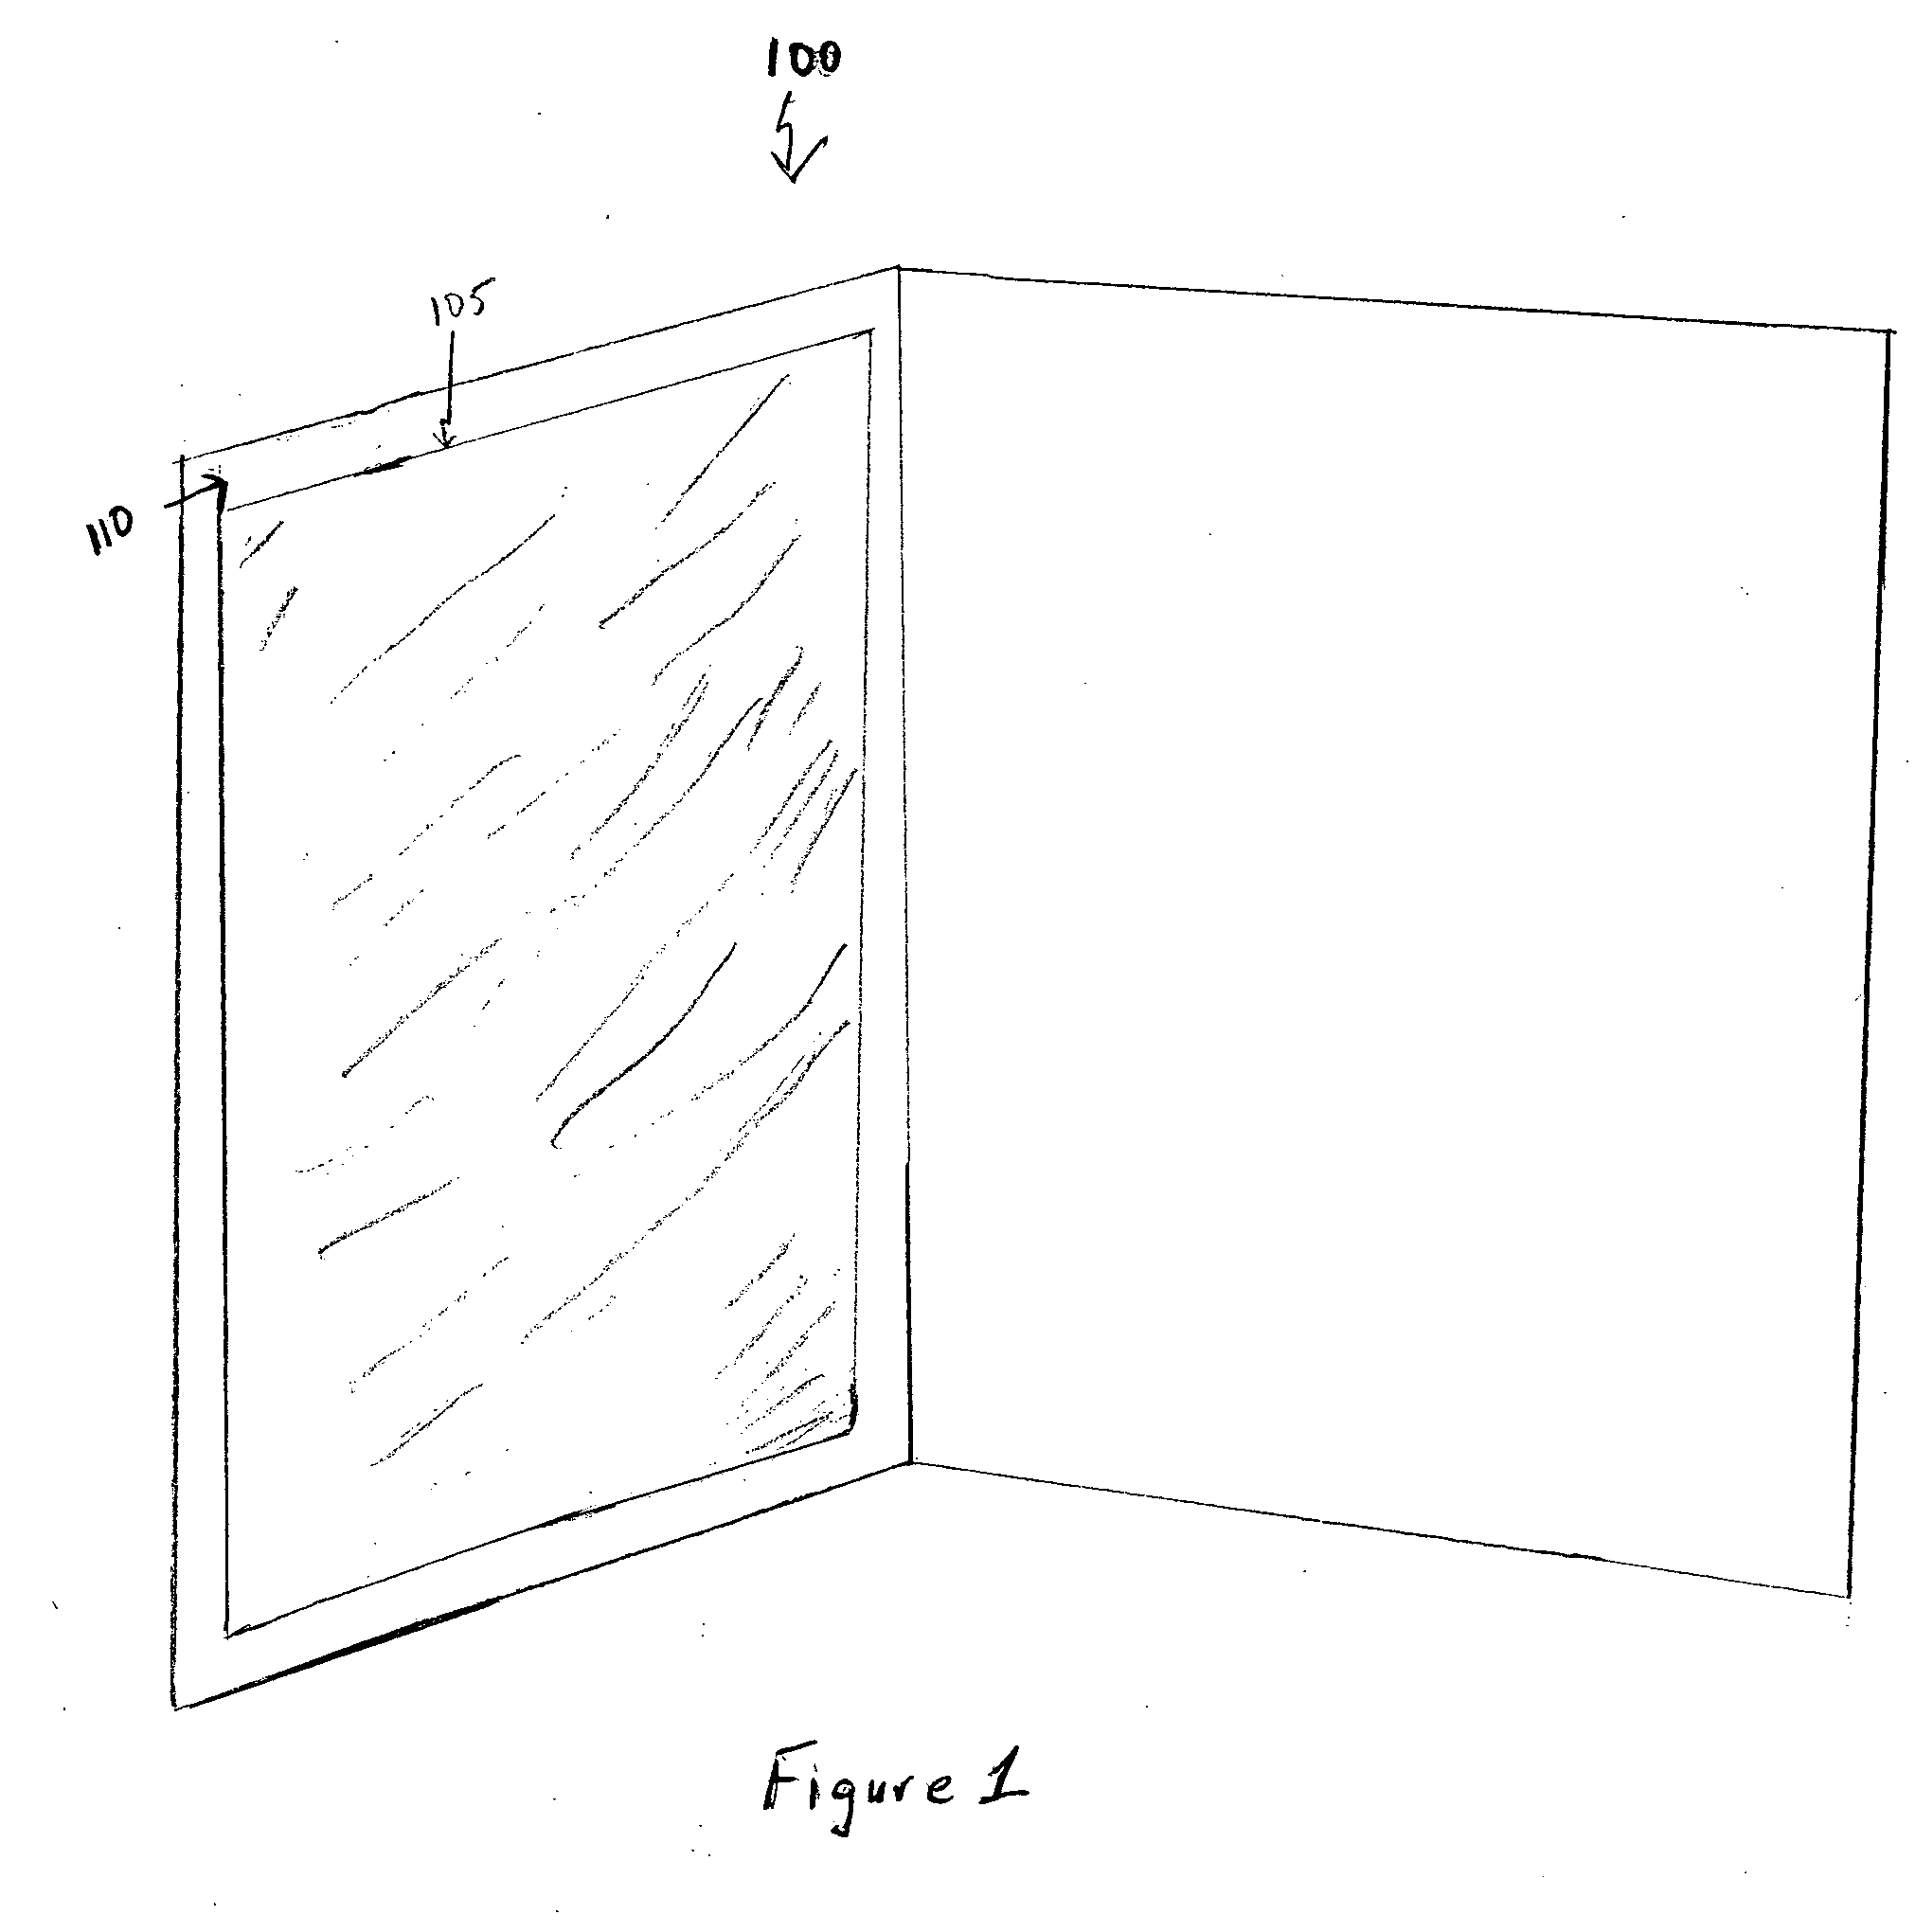 Method and apparatus for providing a card with penmanship improving indicia